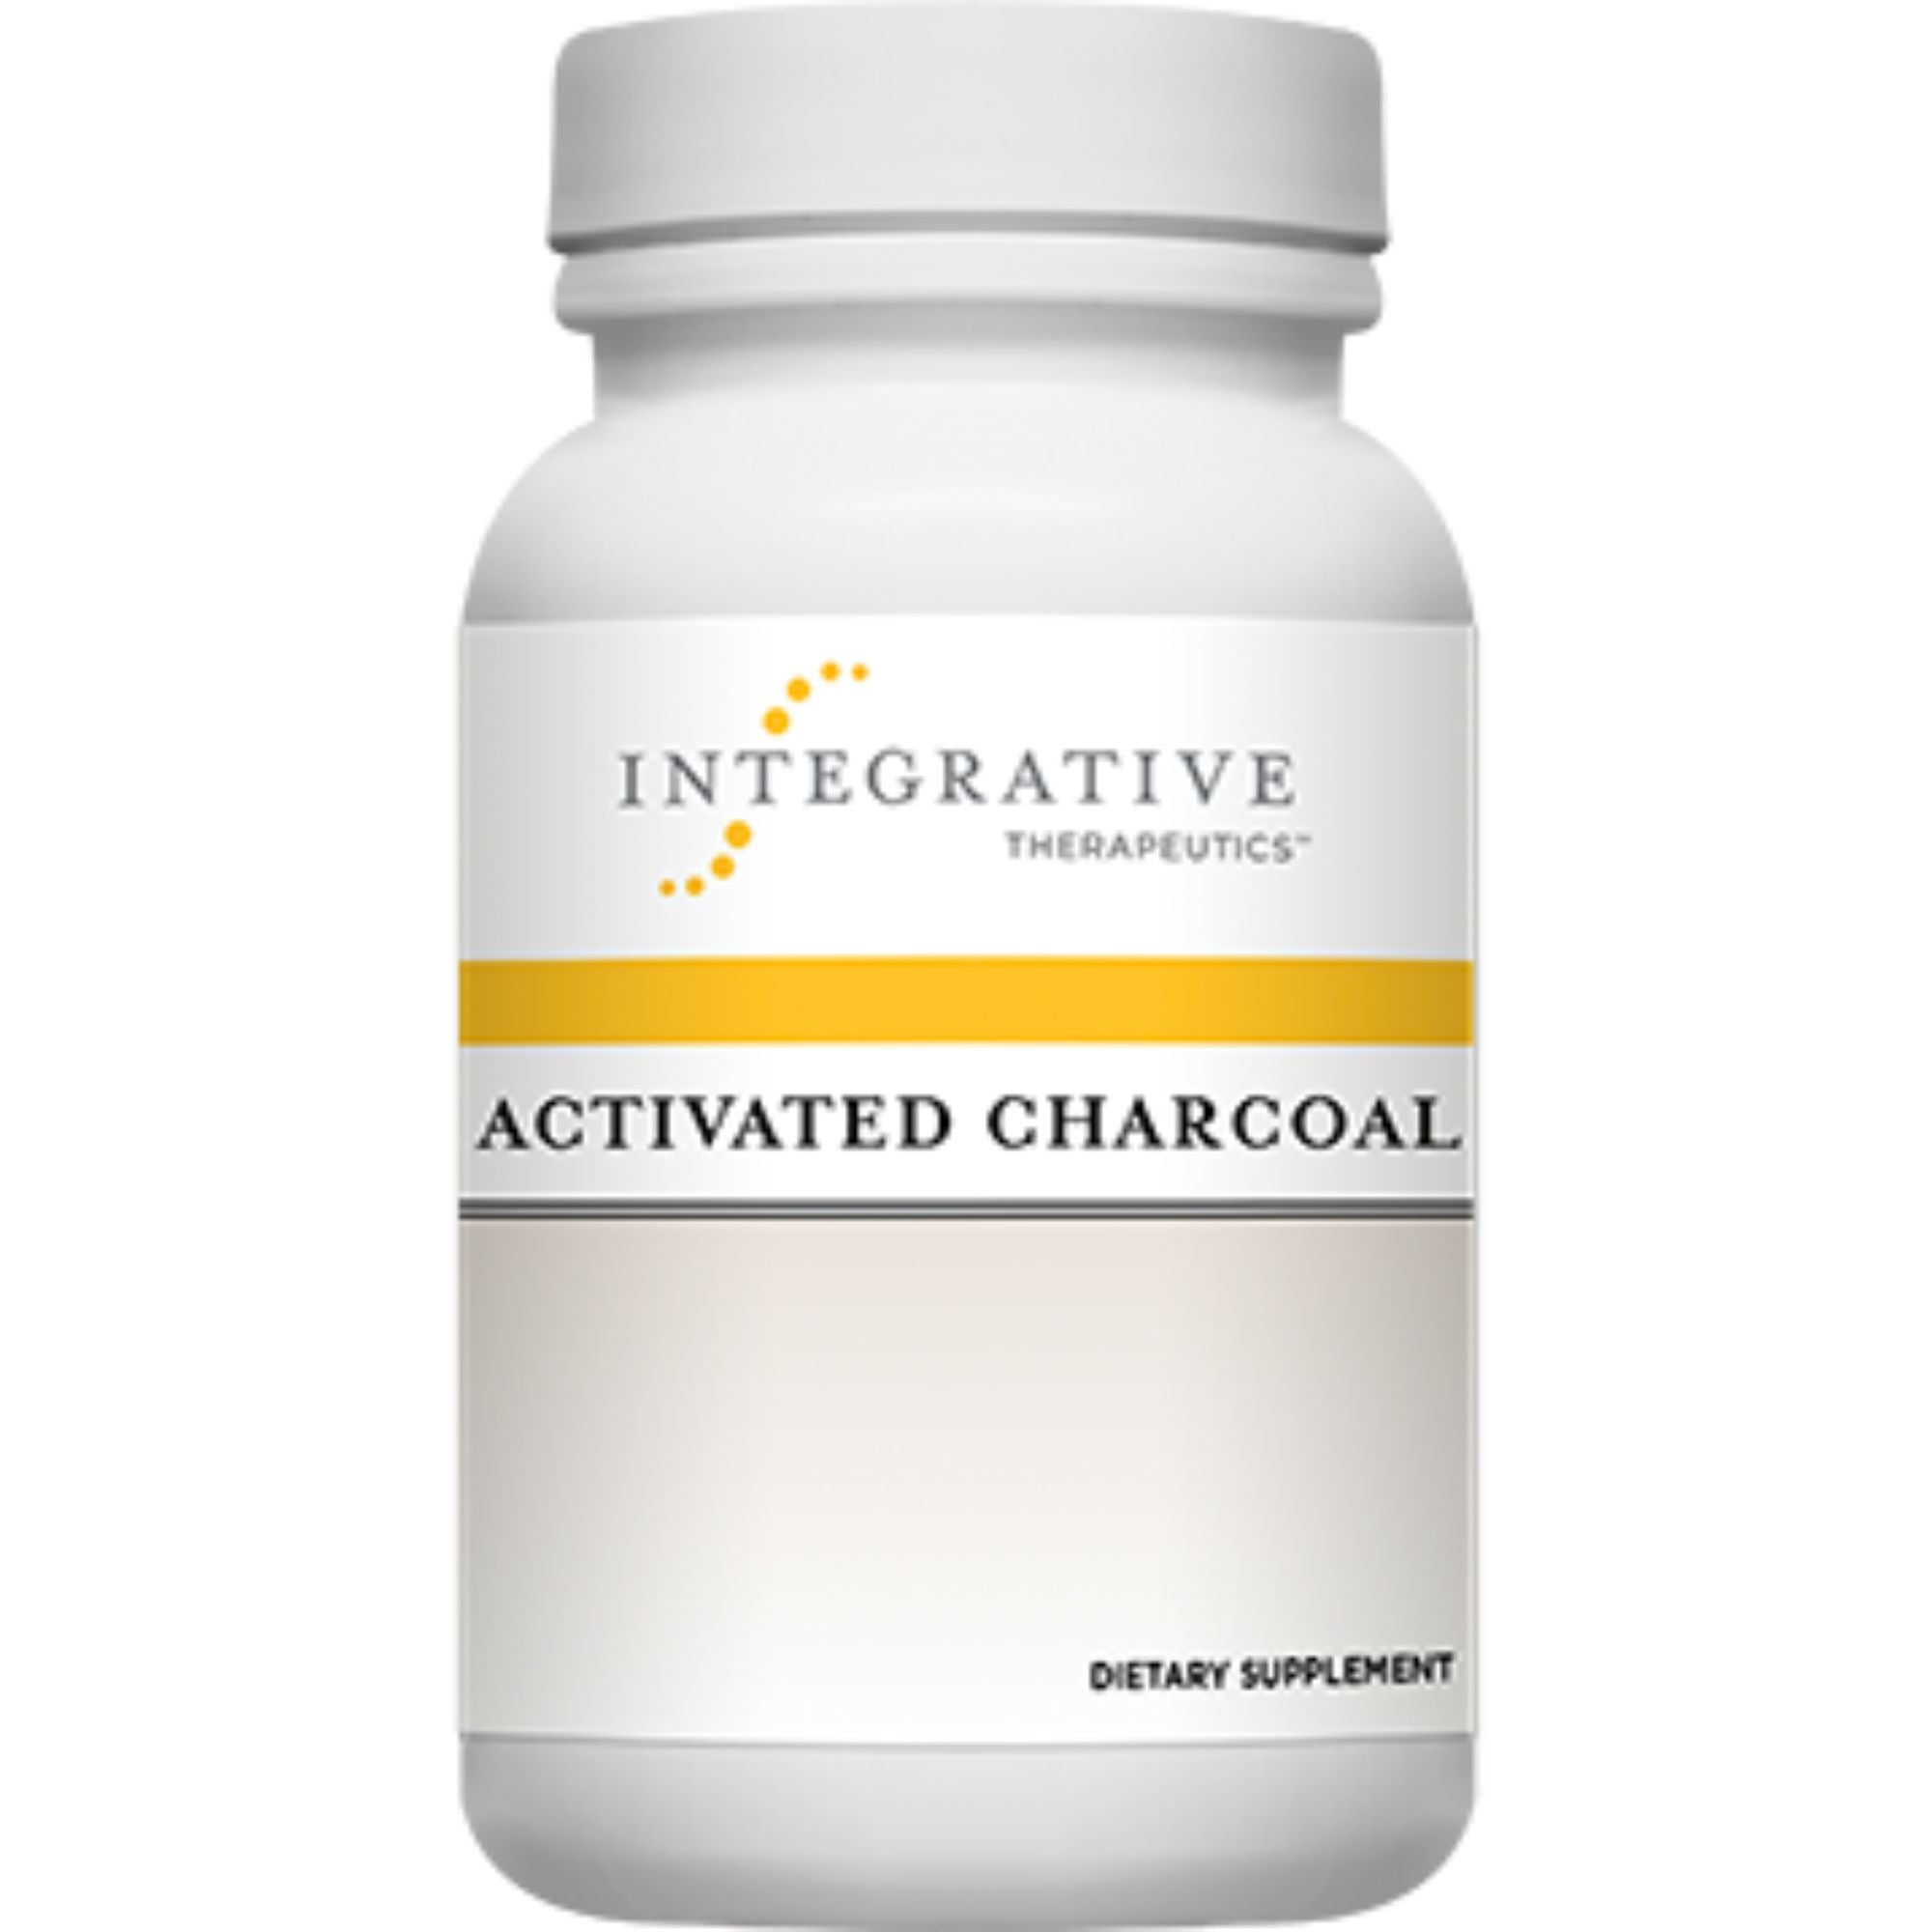 Activated Charcoal Die off & detox support